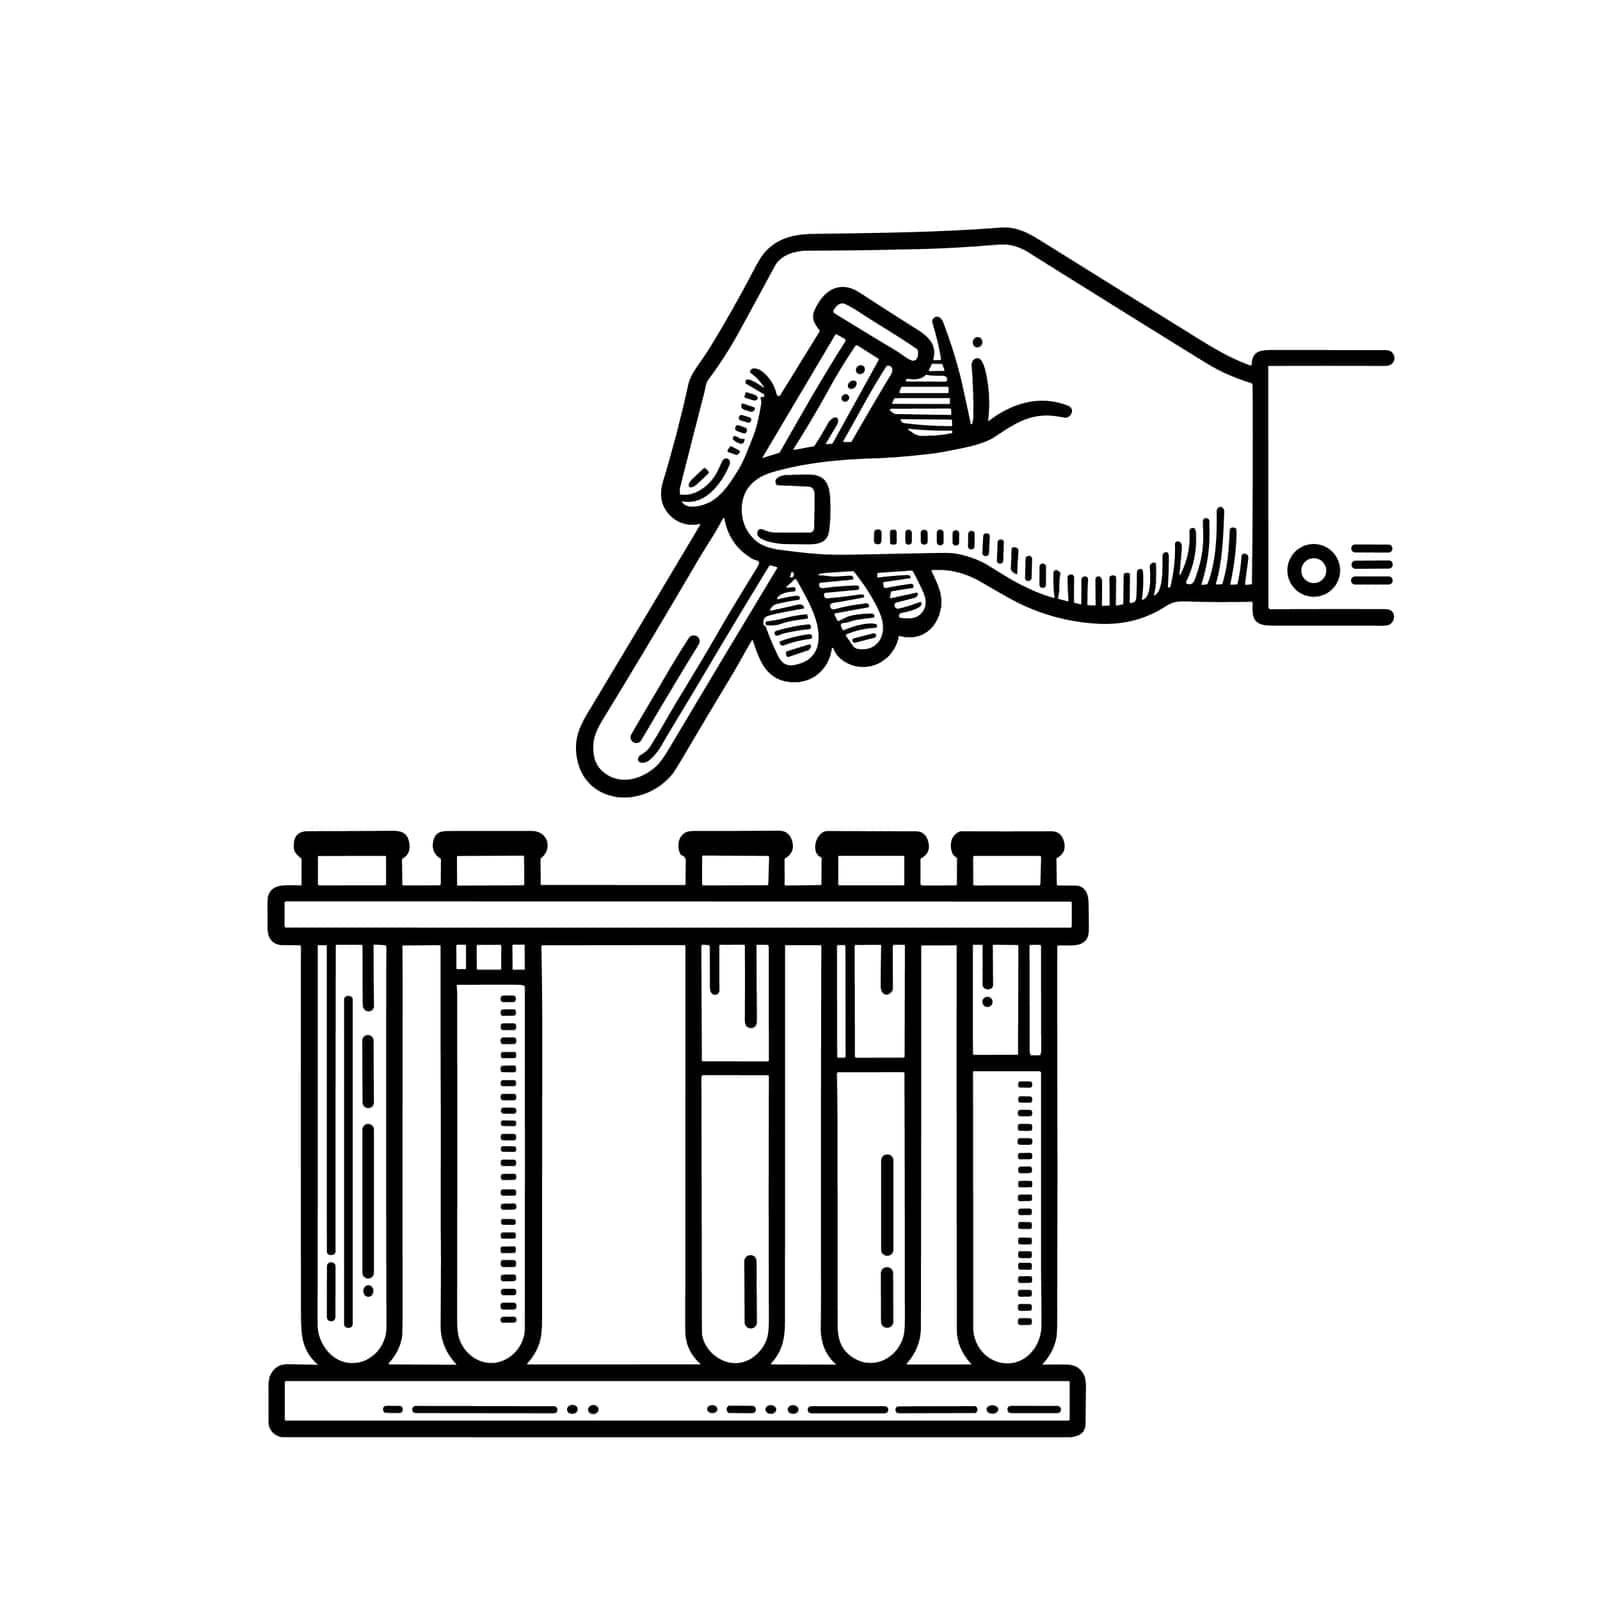 A hand holds a test tube. Black outline icon of a hand taking one test tube from a rack full of test tubes. Vector illustration